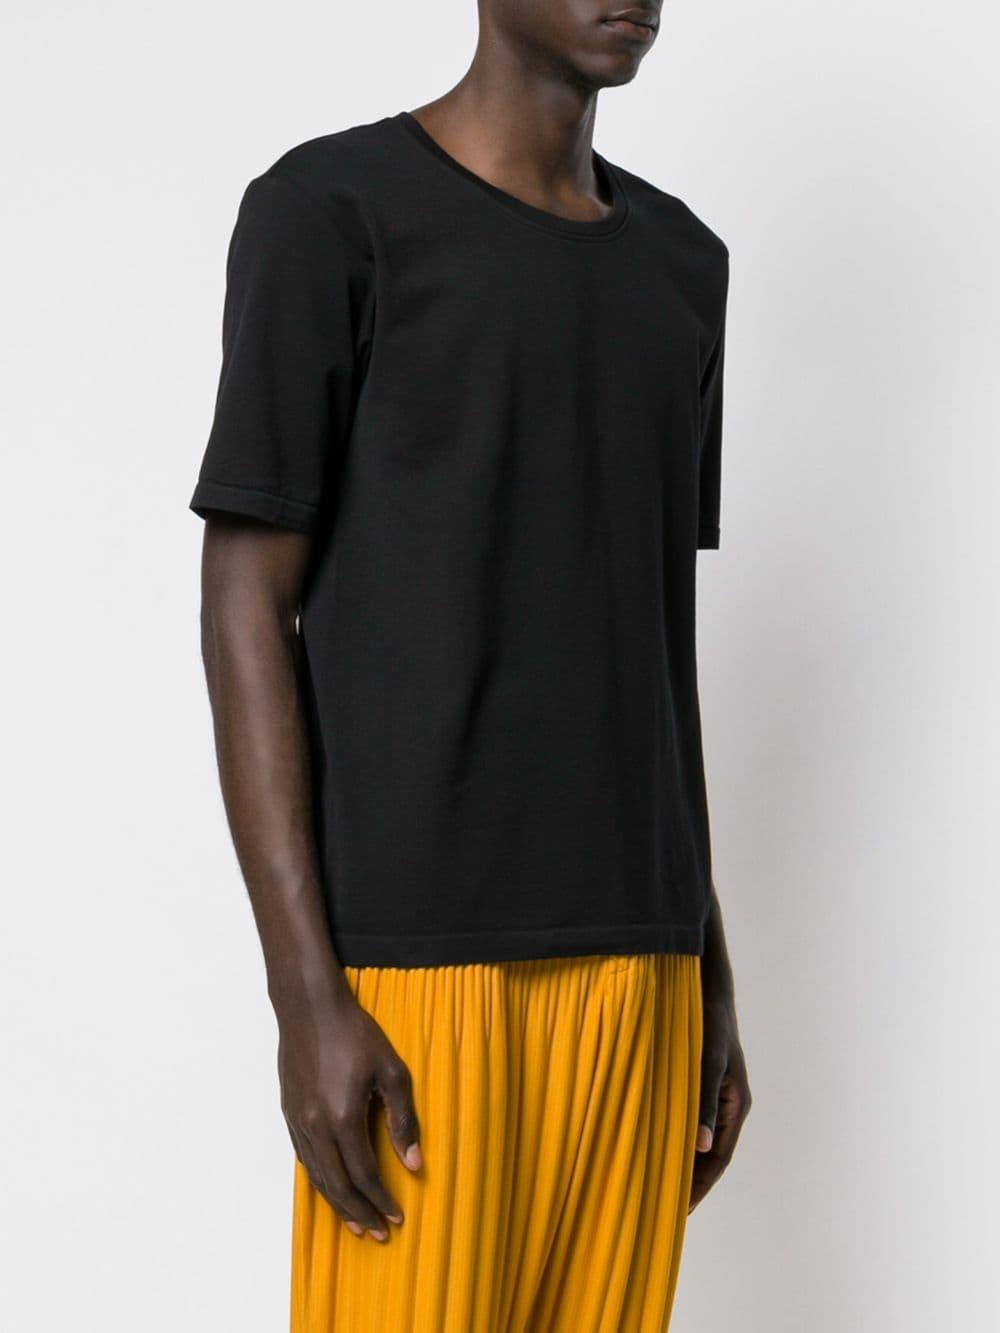 Homme Plissé Issey Miyake Cotton Classic T-shirt in Black for Men - Lyst